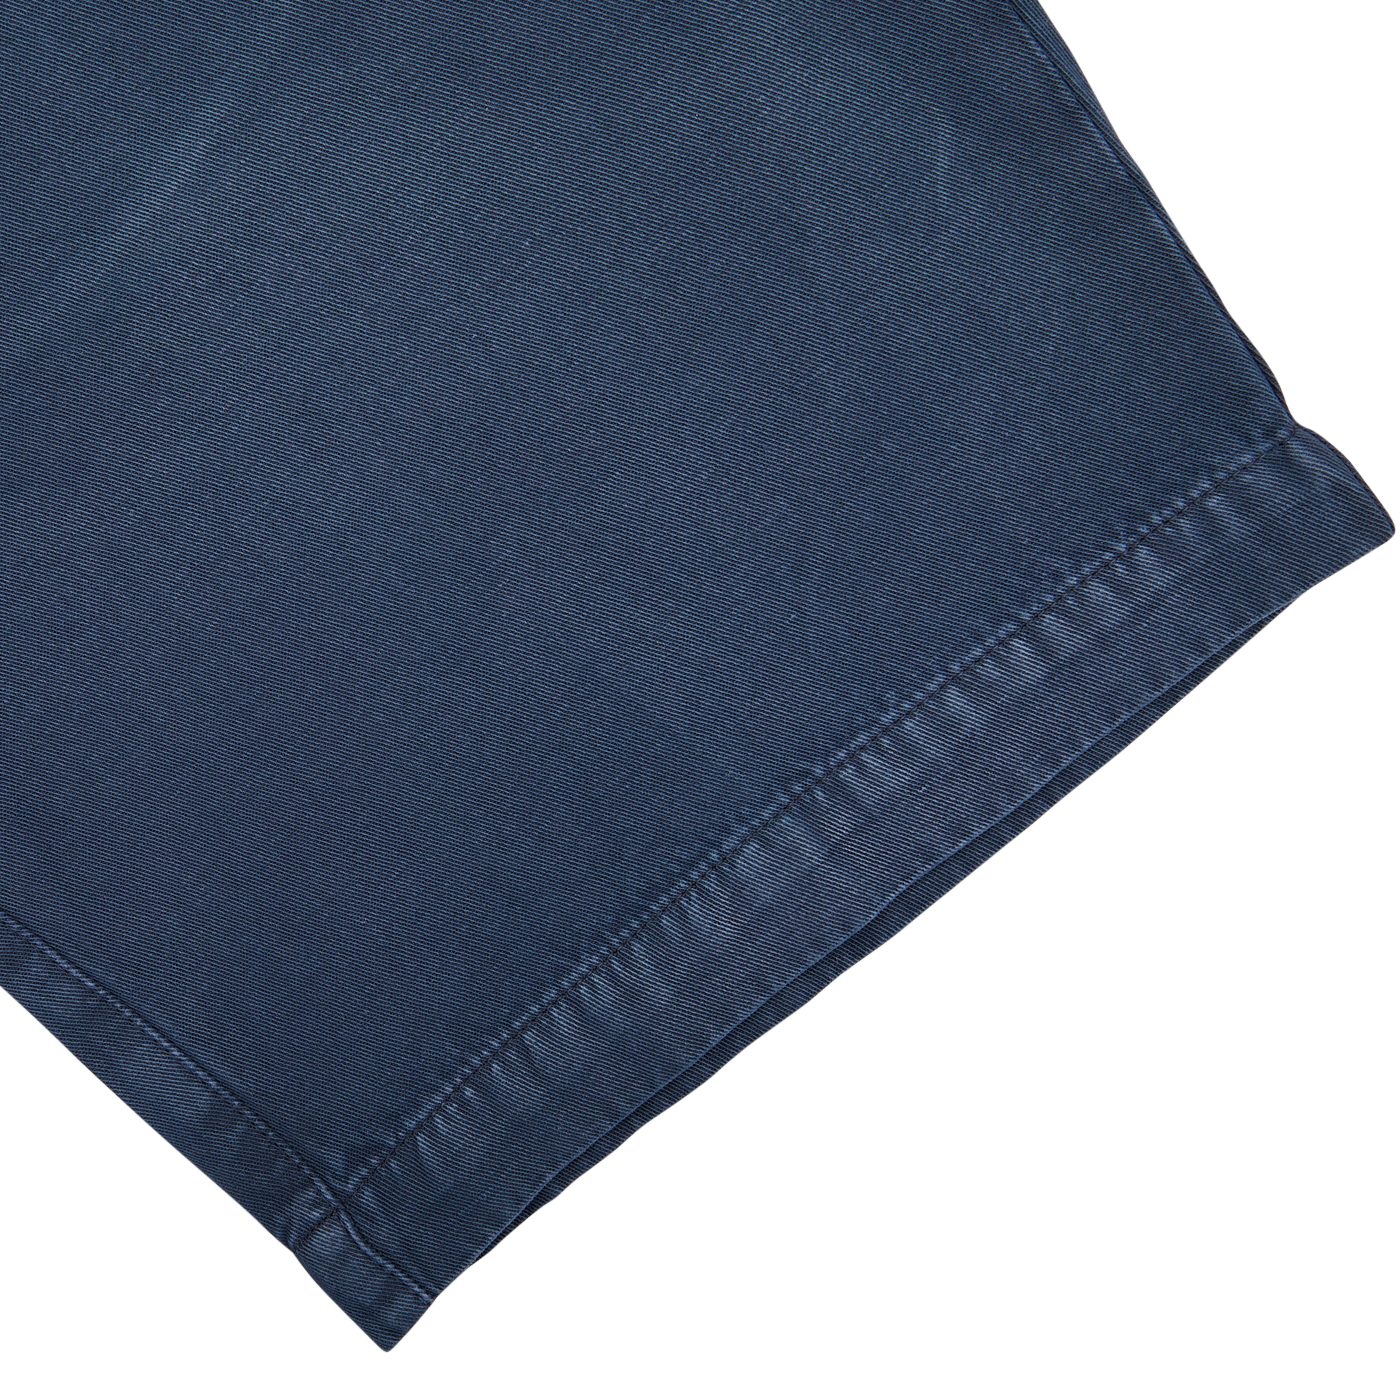 Navy blue fabric with neat hemming on a white background by Briglia.